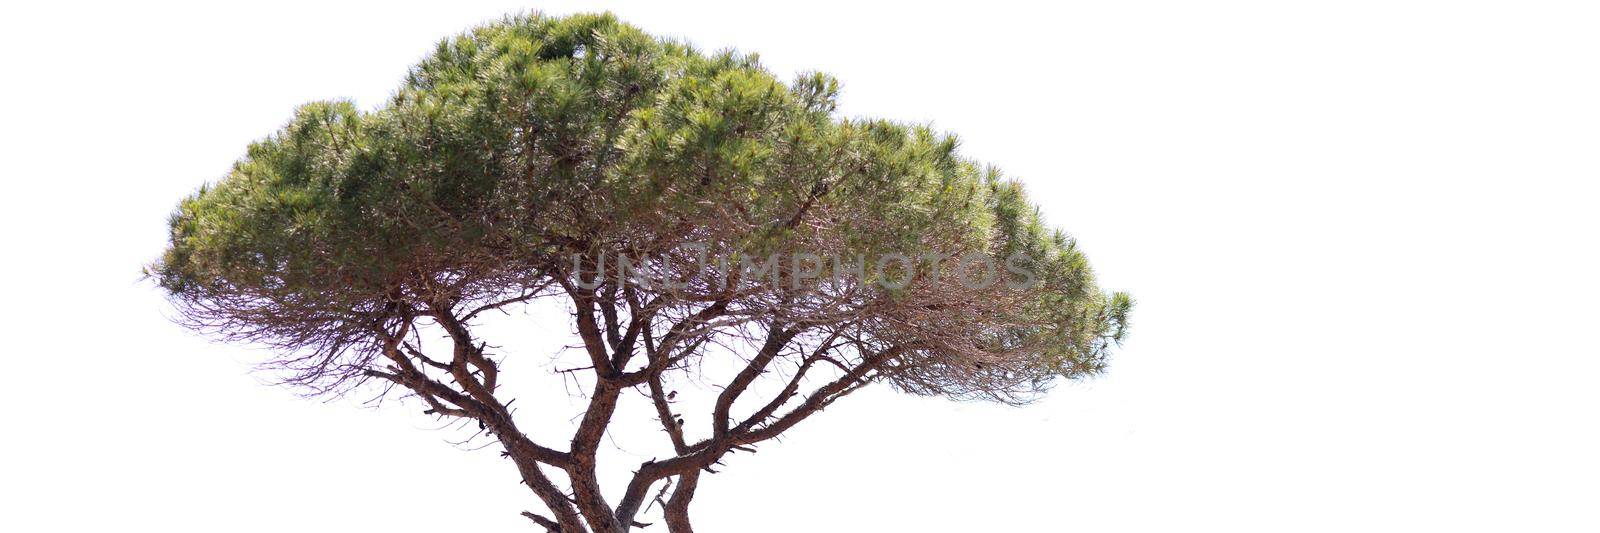 Evergreen pine tree with bare trunk background by kuprevich